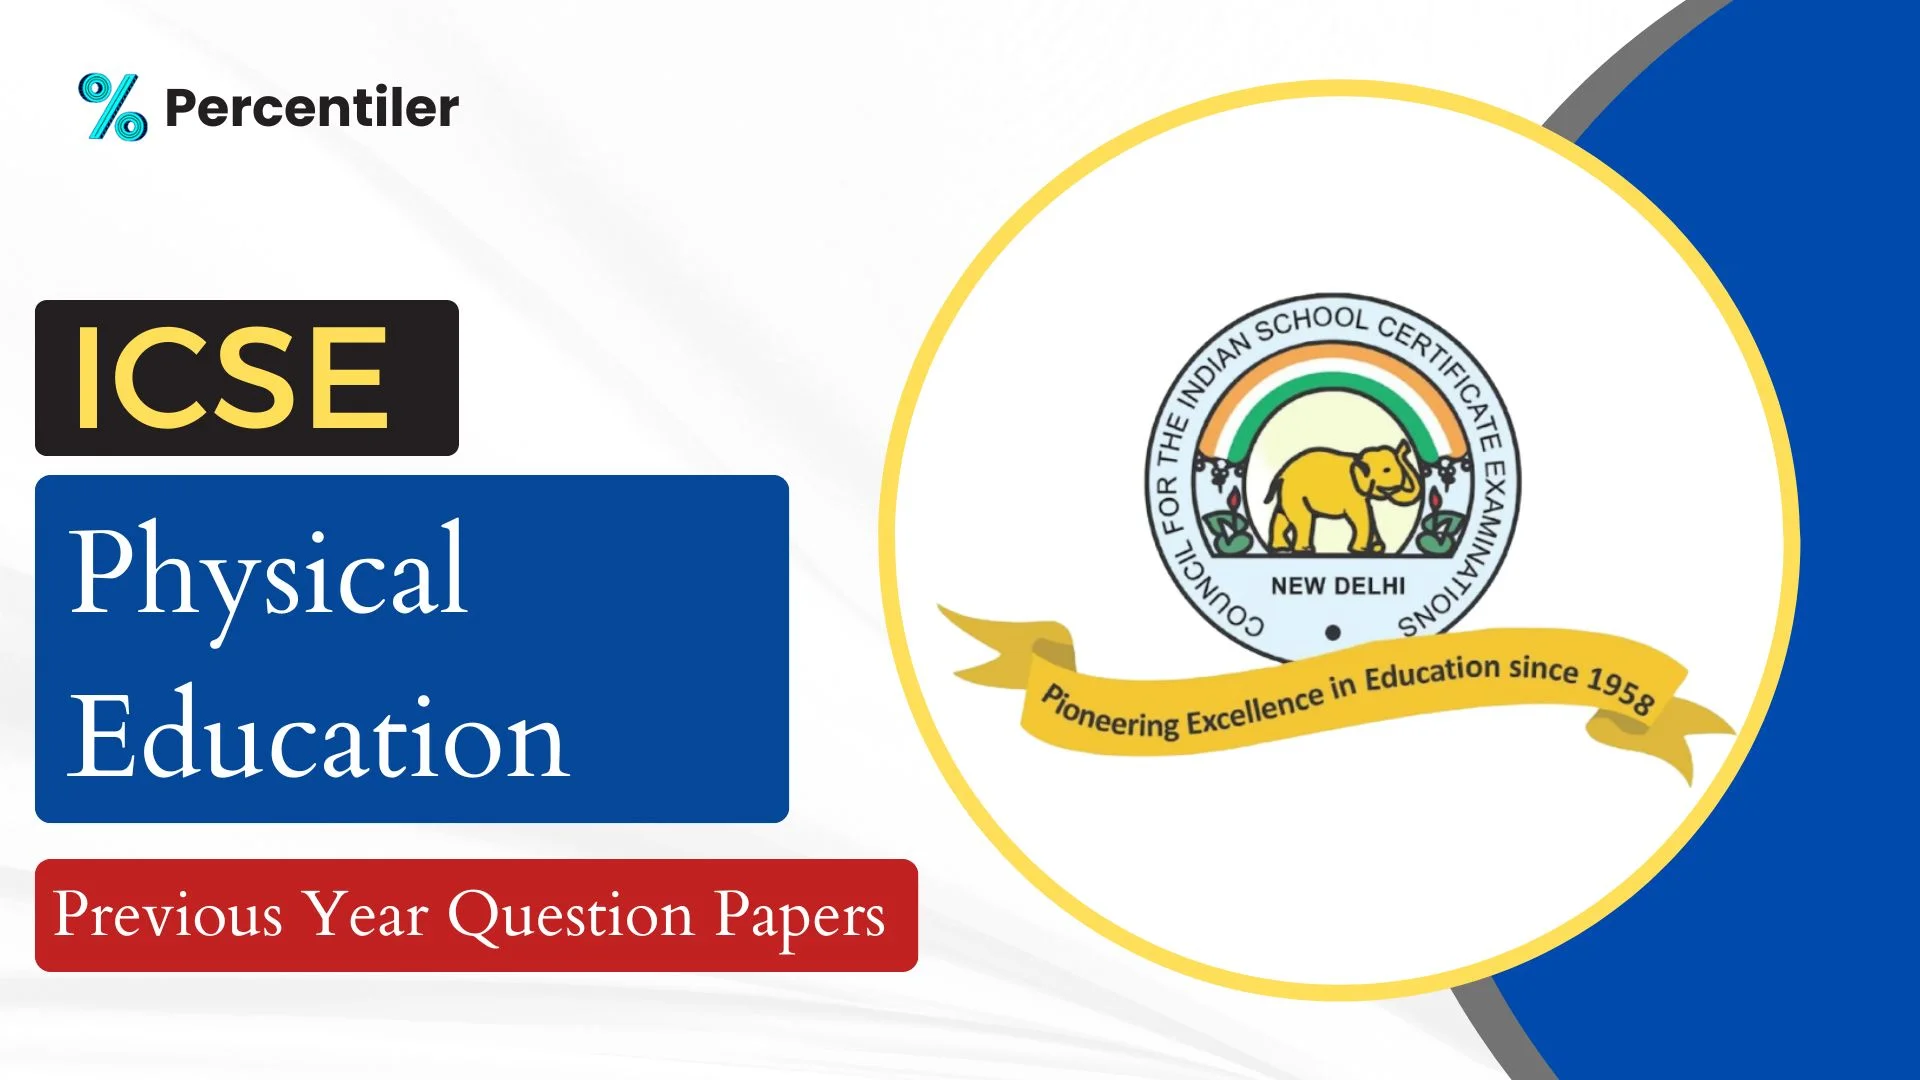 ICSE Physical Education Previous Year Question Papers